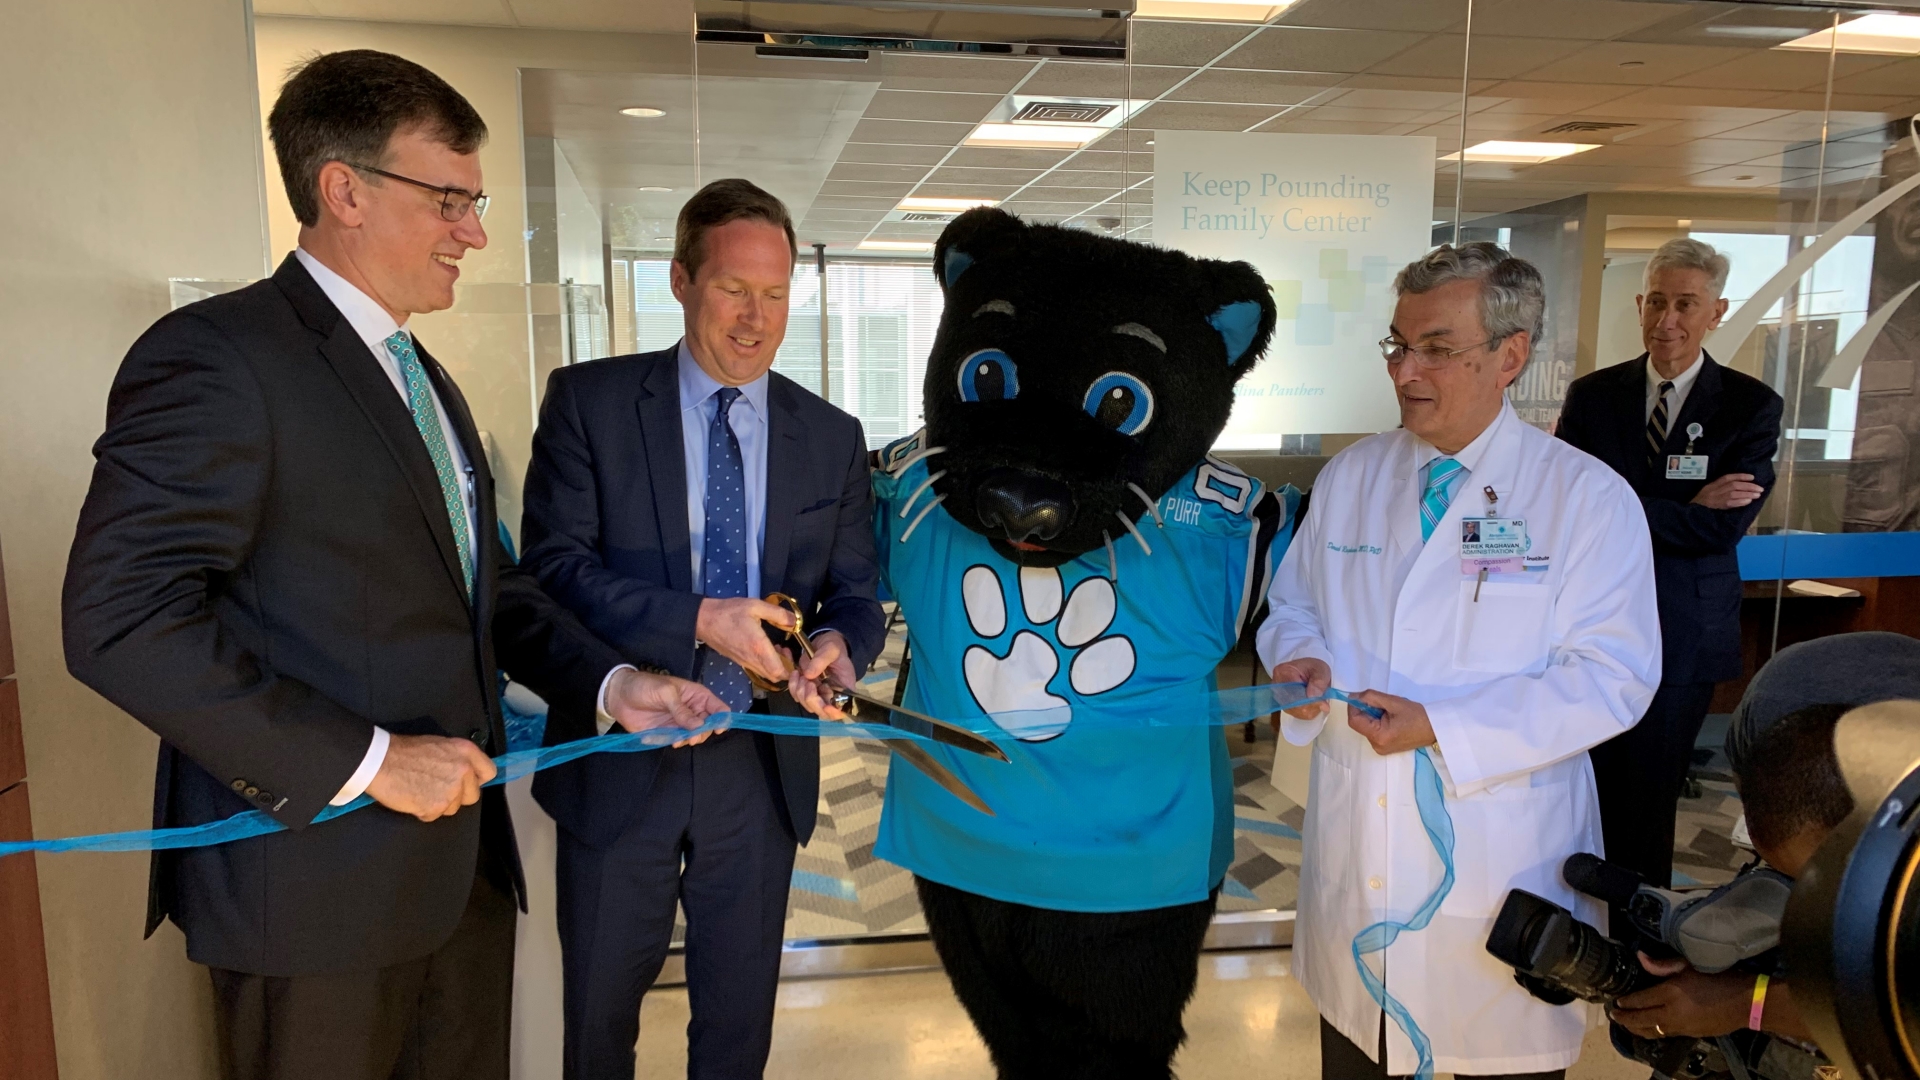 The Carolina Panthers, long-time supporters of Atrium Health, have committed $1 million to support cancer research at the Institute through the Keep Pounding Fund. In recognition of their generous gift, the Keep Pounding Family Center in the newly expanded Institute is being named in honor of the team’s signature mantra, Keep Pounding.